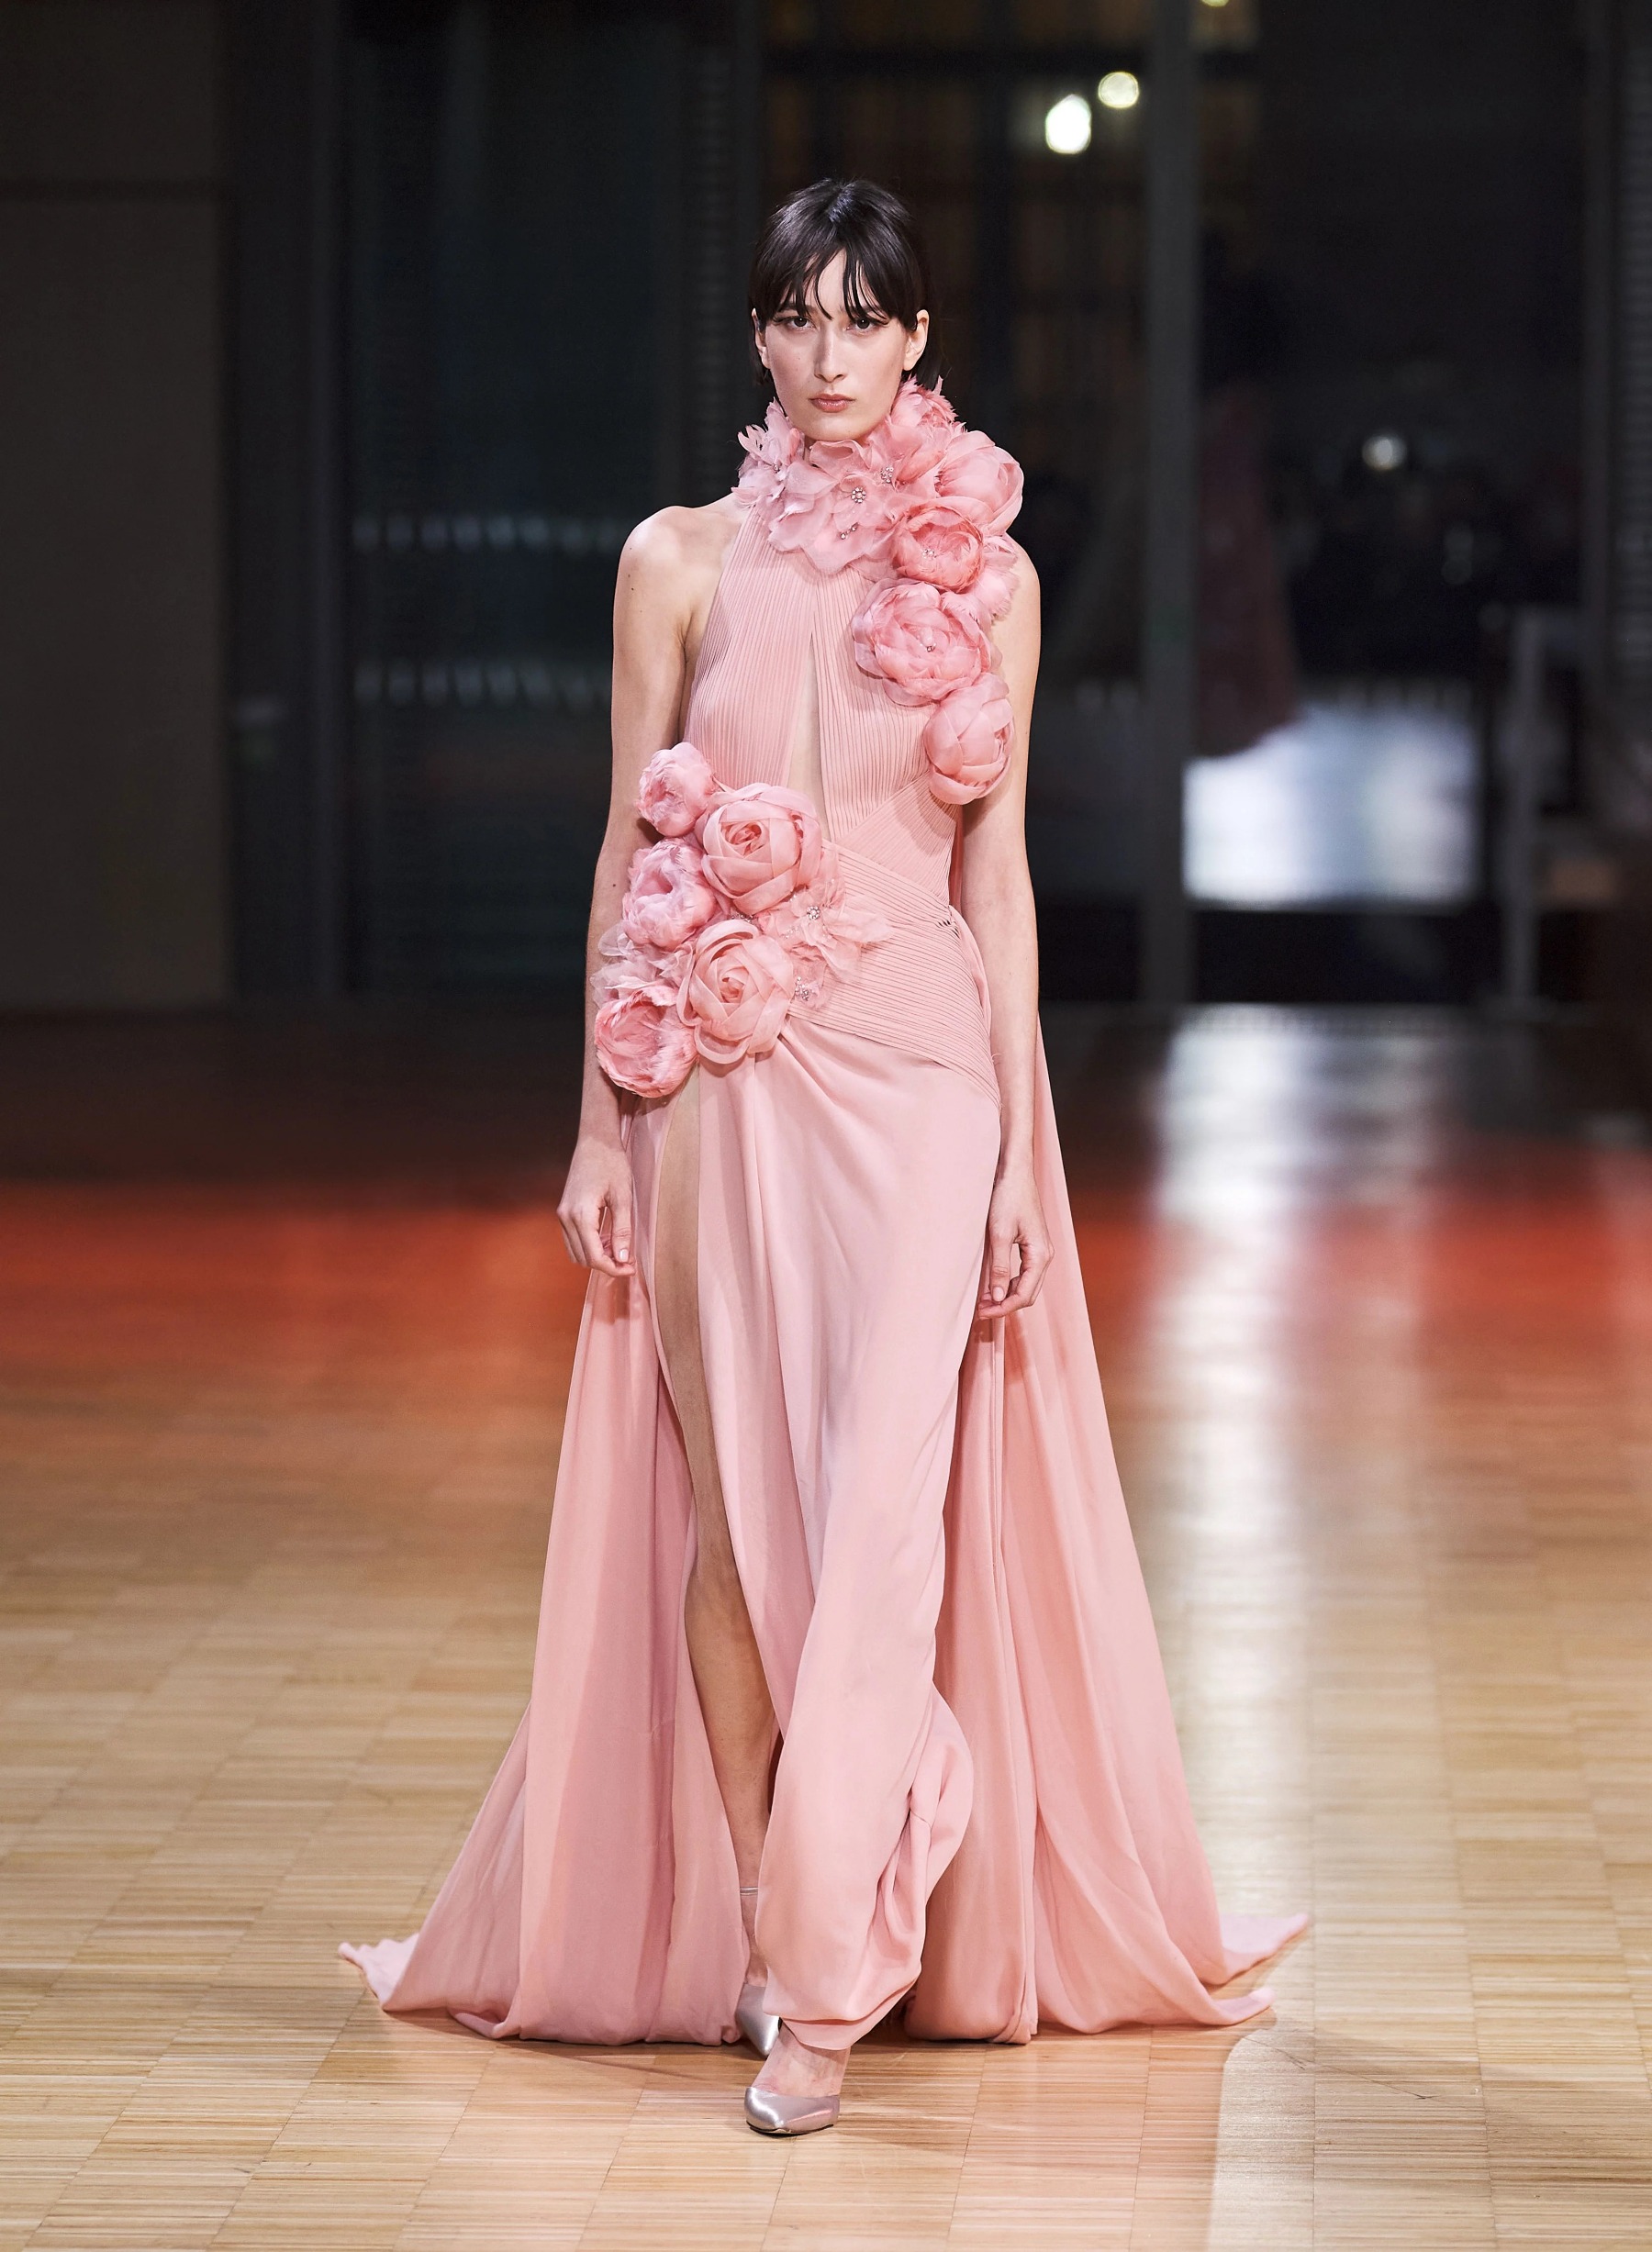 dramatic pink gown with oversized flowers